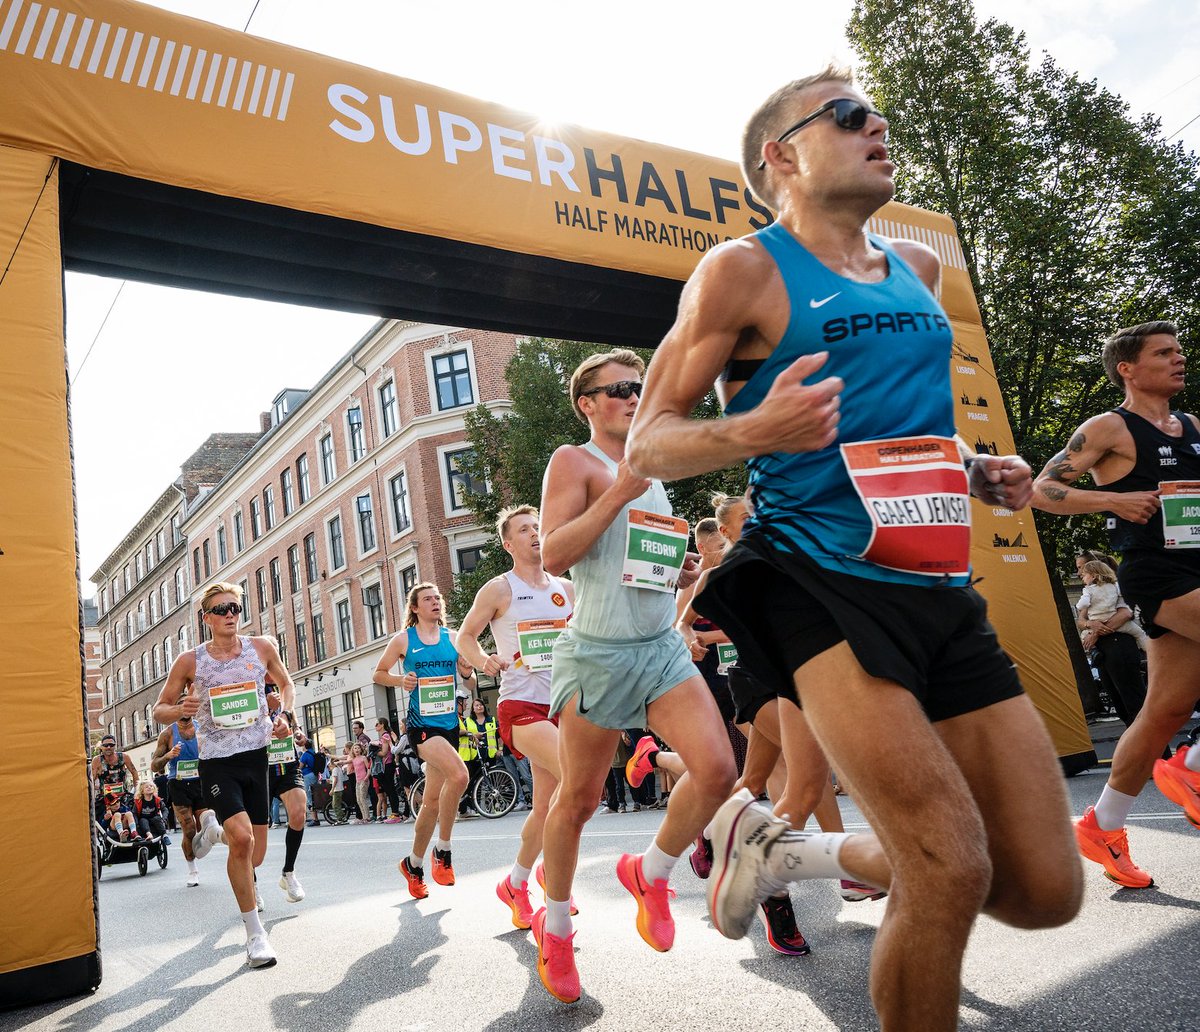 SuperHalfs weekender is coming! Not one but TWO SuperHalfs events will be taking place in just two weeks, the Prague Half on 06.04 followed by Berlin on 07.04…are you team Prague or team Berlin?👀 #SuperHalfs #runwithrealbuzz #runner #charity #running #Prague #Berlin